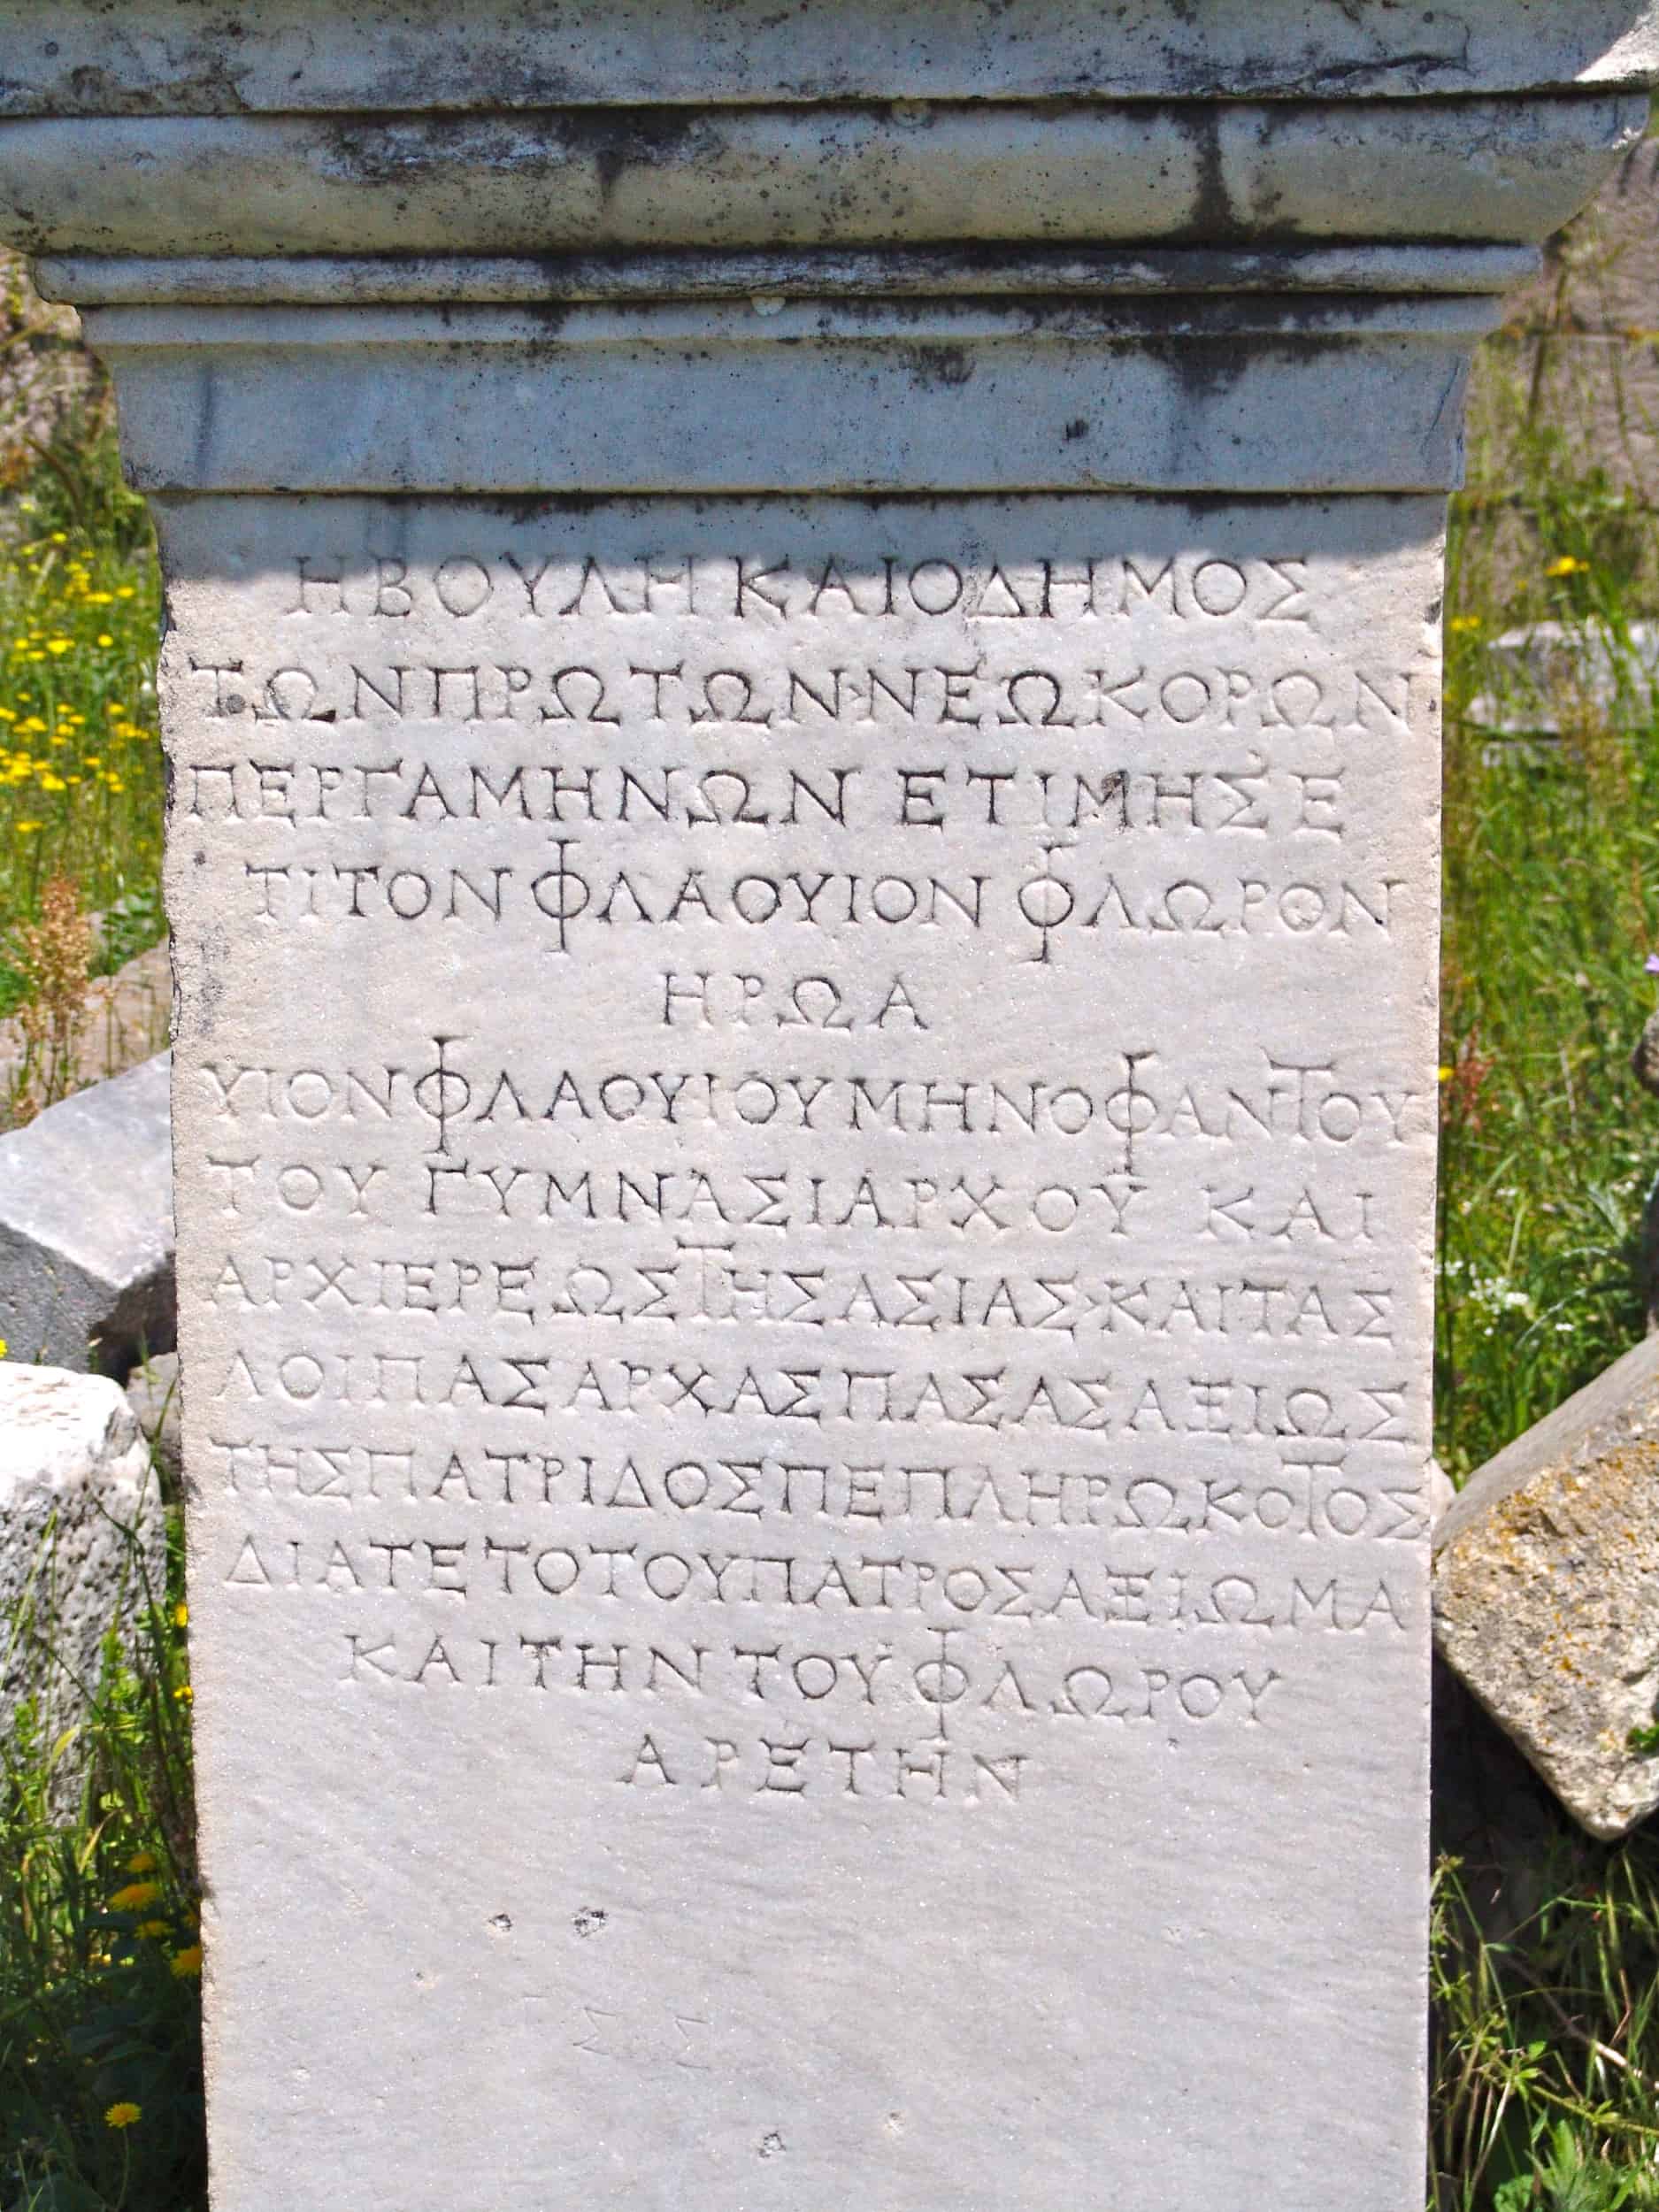 Honorific inscription in the Palaestra of the Upper Gymnasium